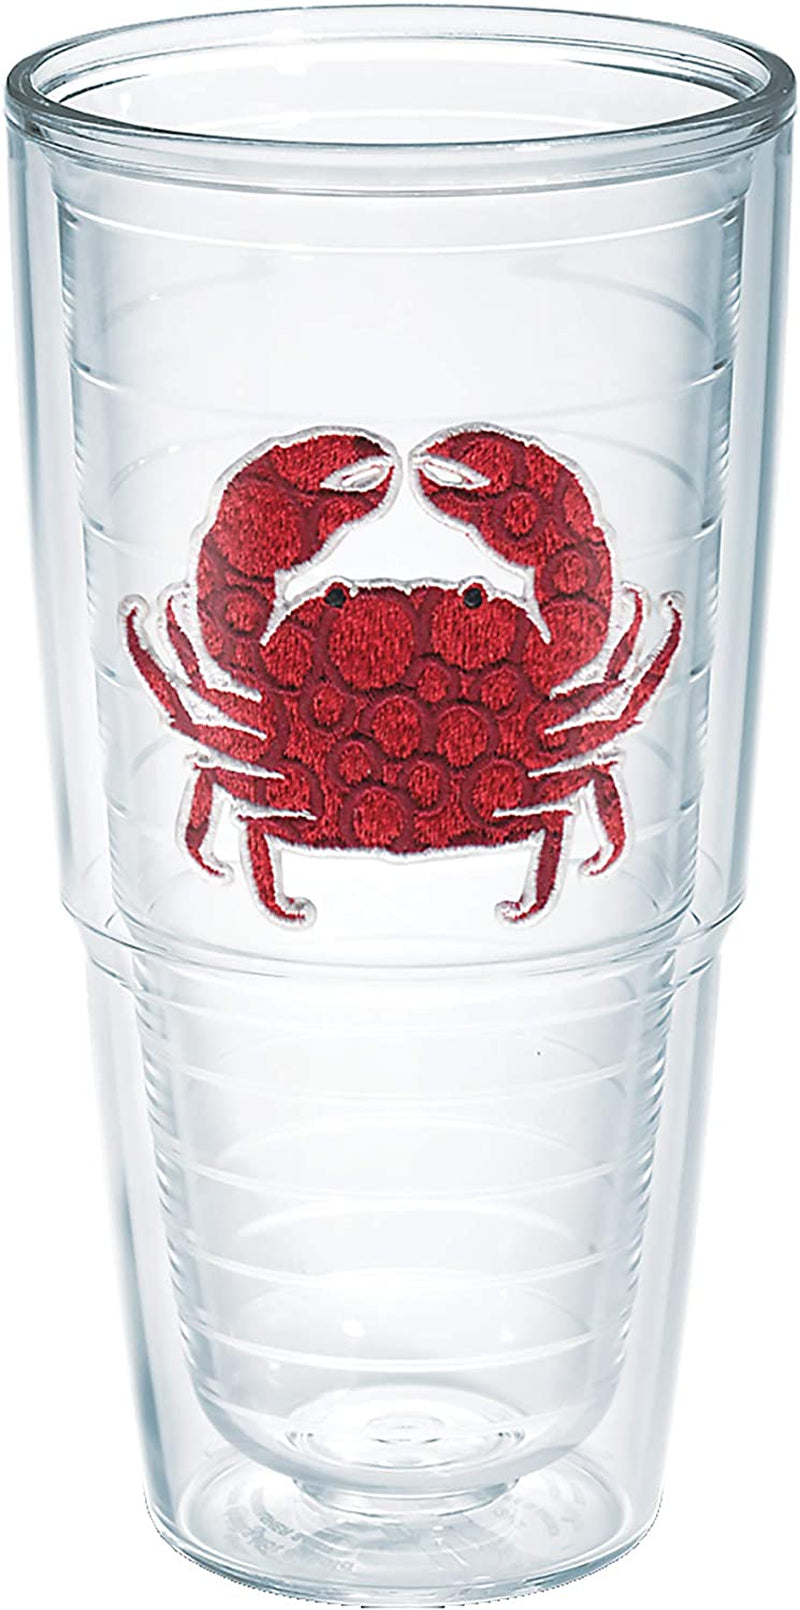 Tervis Crab Insulated Tumbler with Emblem and Red Lid, 16 Oz, Clear Home & Garden > Kitchen & Dining > Tableware > Drinkware Tervis No Lid 24oz 